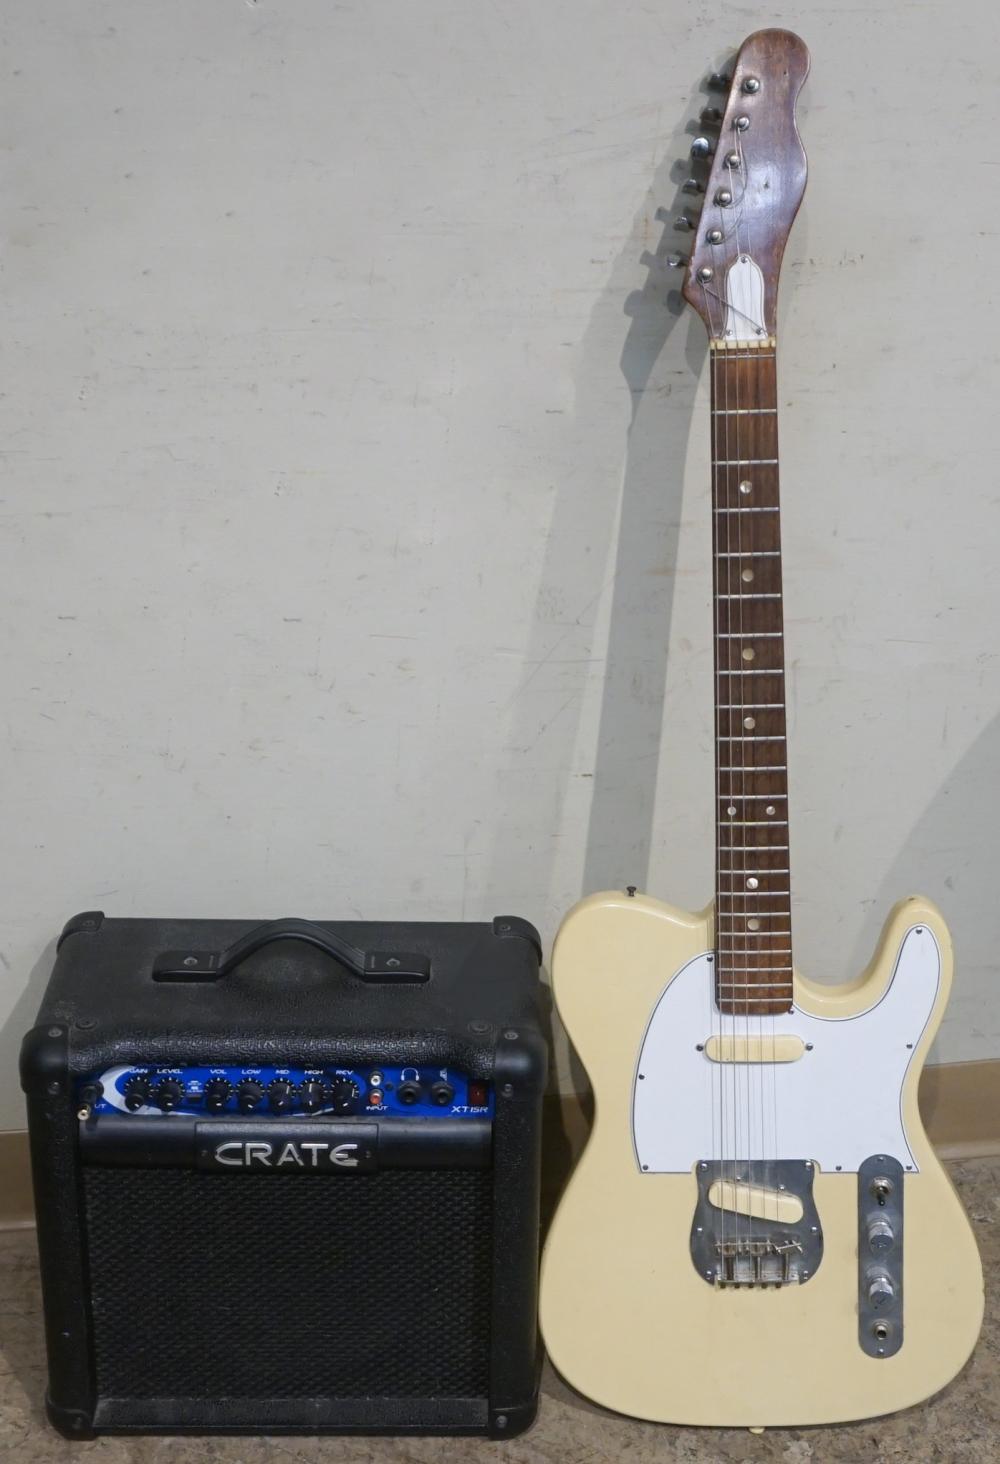 ELECTRIC GUITAR AND CRATE PORTABLE